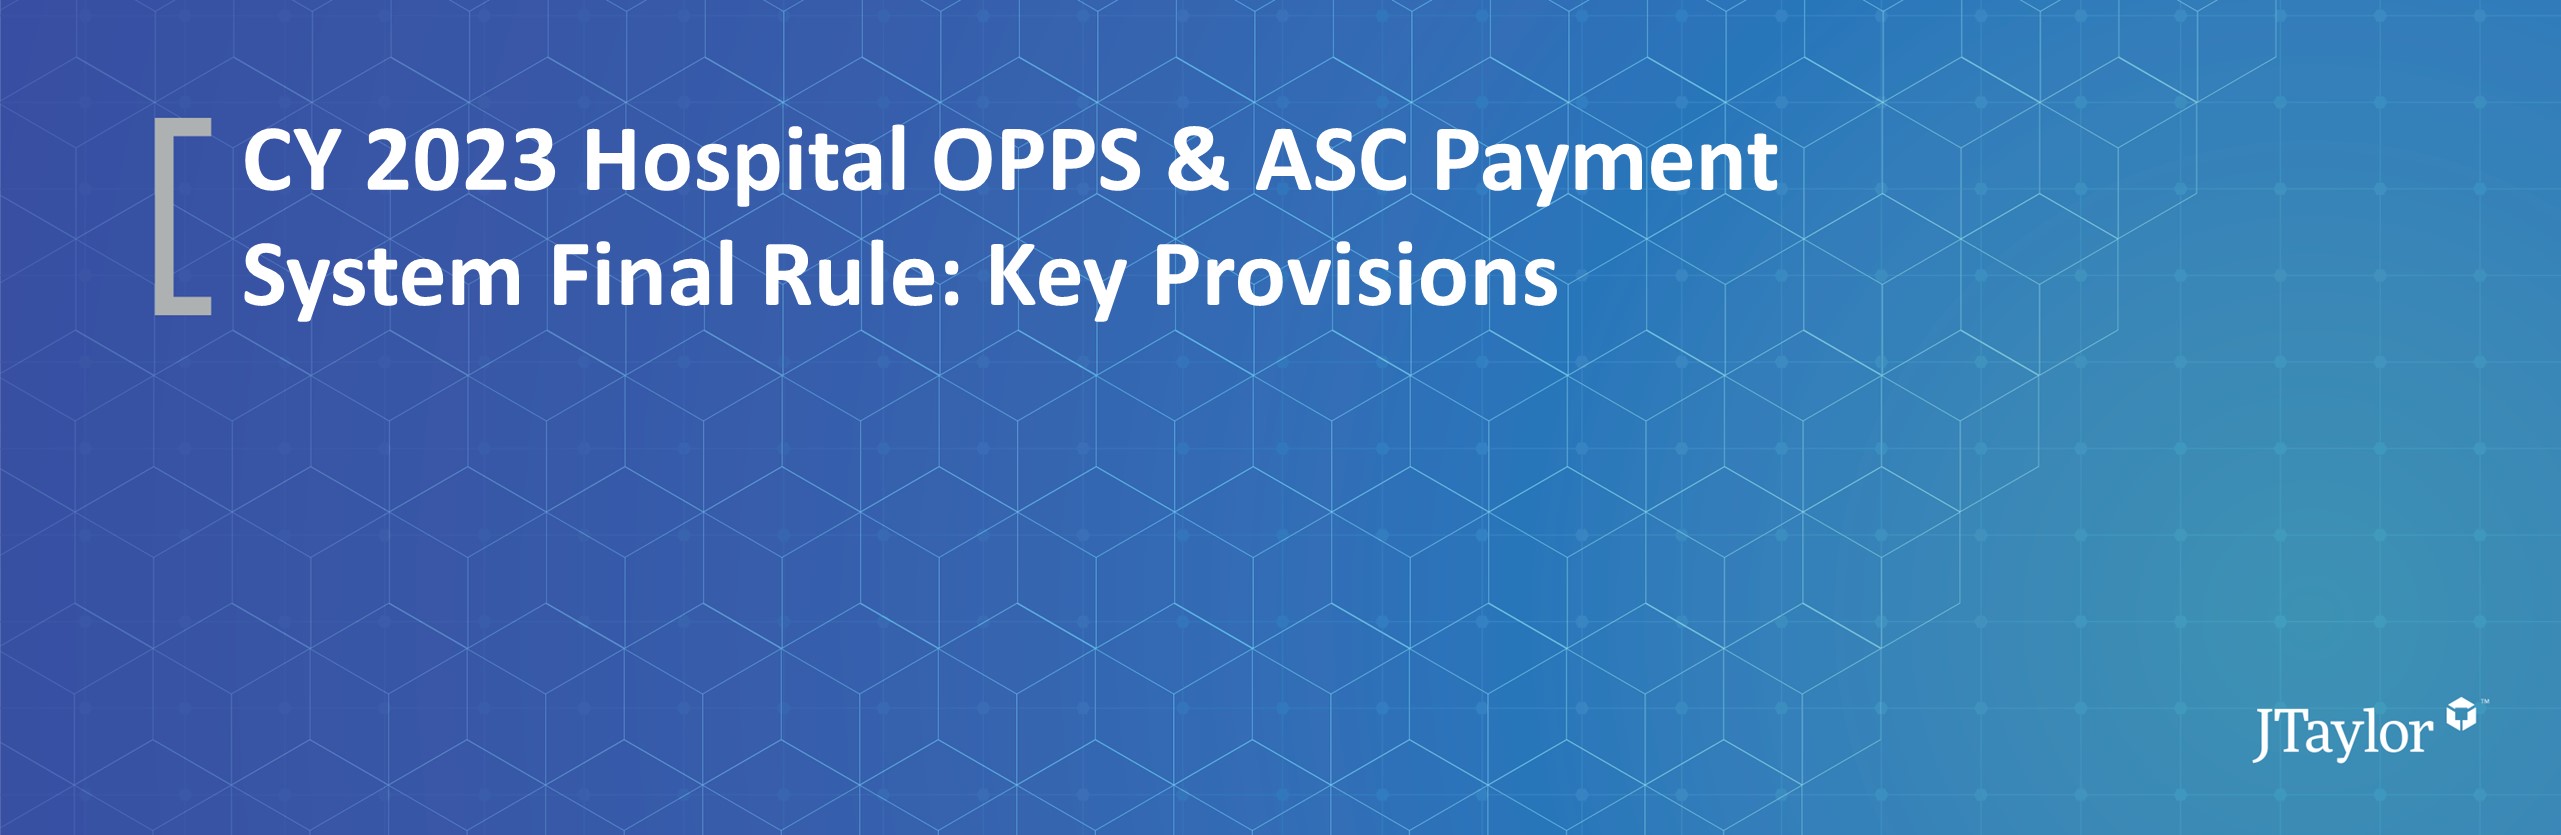 CY 2023 Hospital OPPS and ASC Payment System Final Rule: Key Provisions